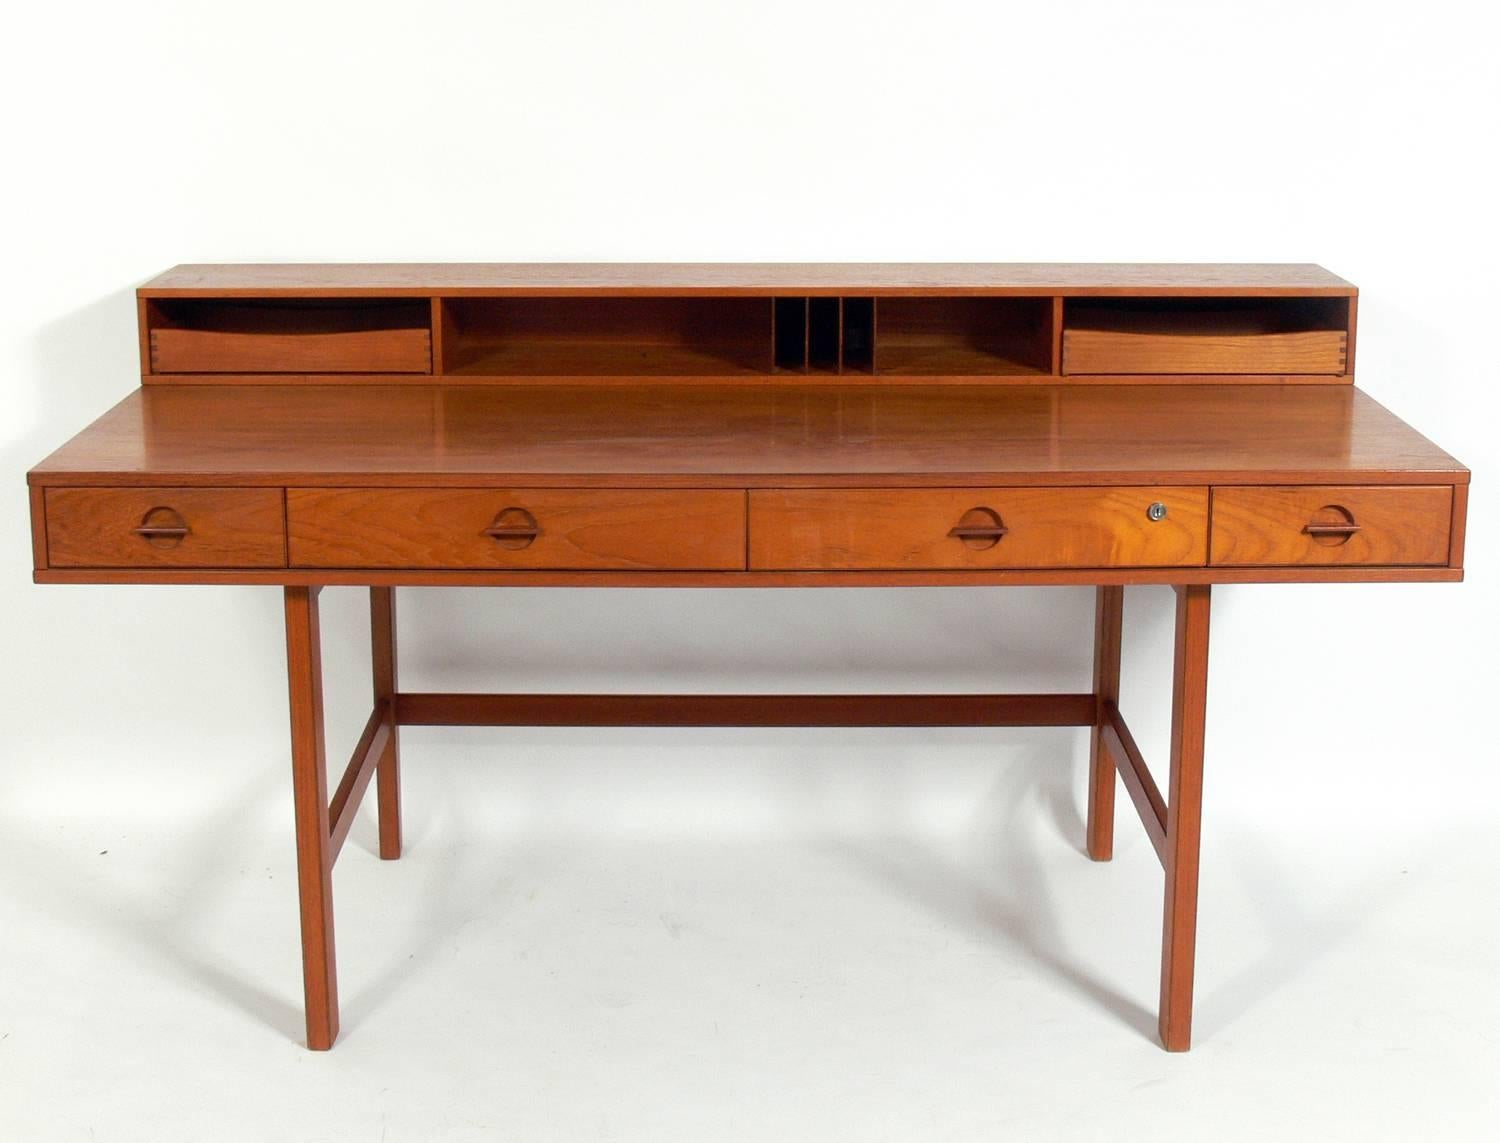 Clean lined architectural Danish modern desk by Jens Quistgaard for Løvig, Denmark, circa 1960s. This desk is currently being refinished and will look incredible when it is completed. We do not have the key to the original lock, if you prefer, we